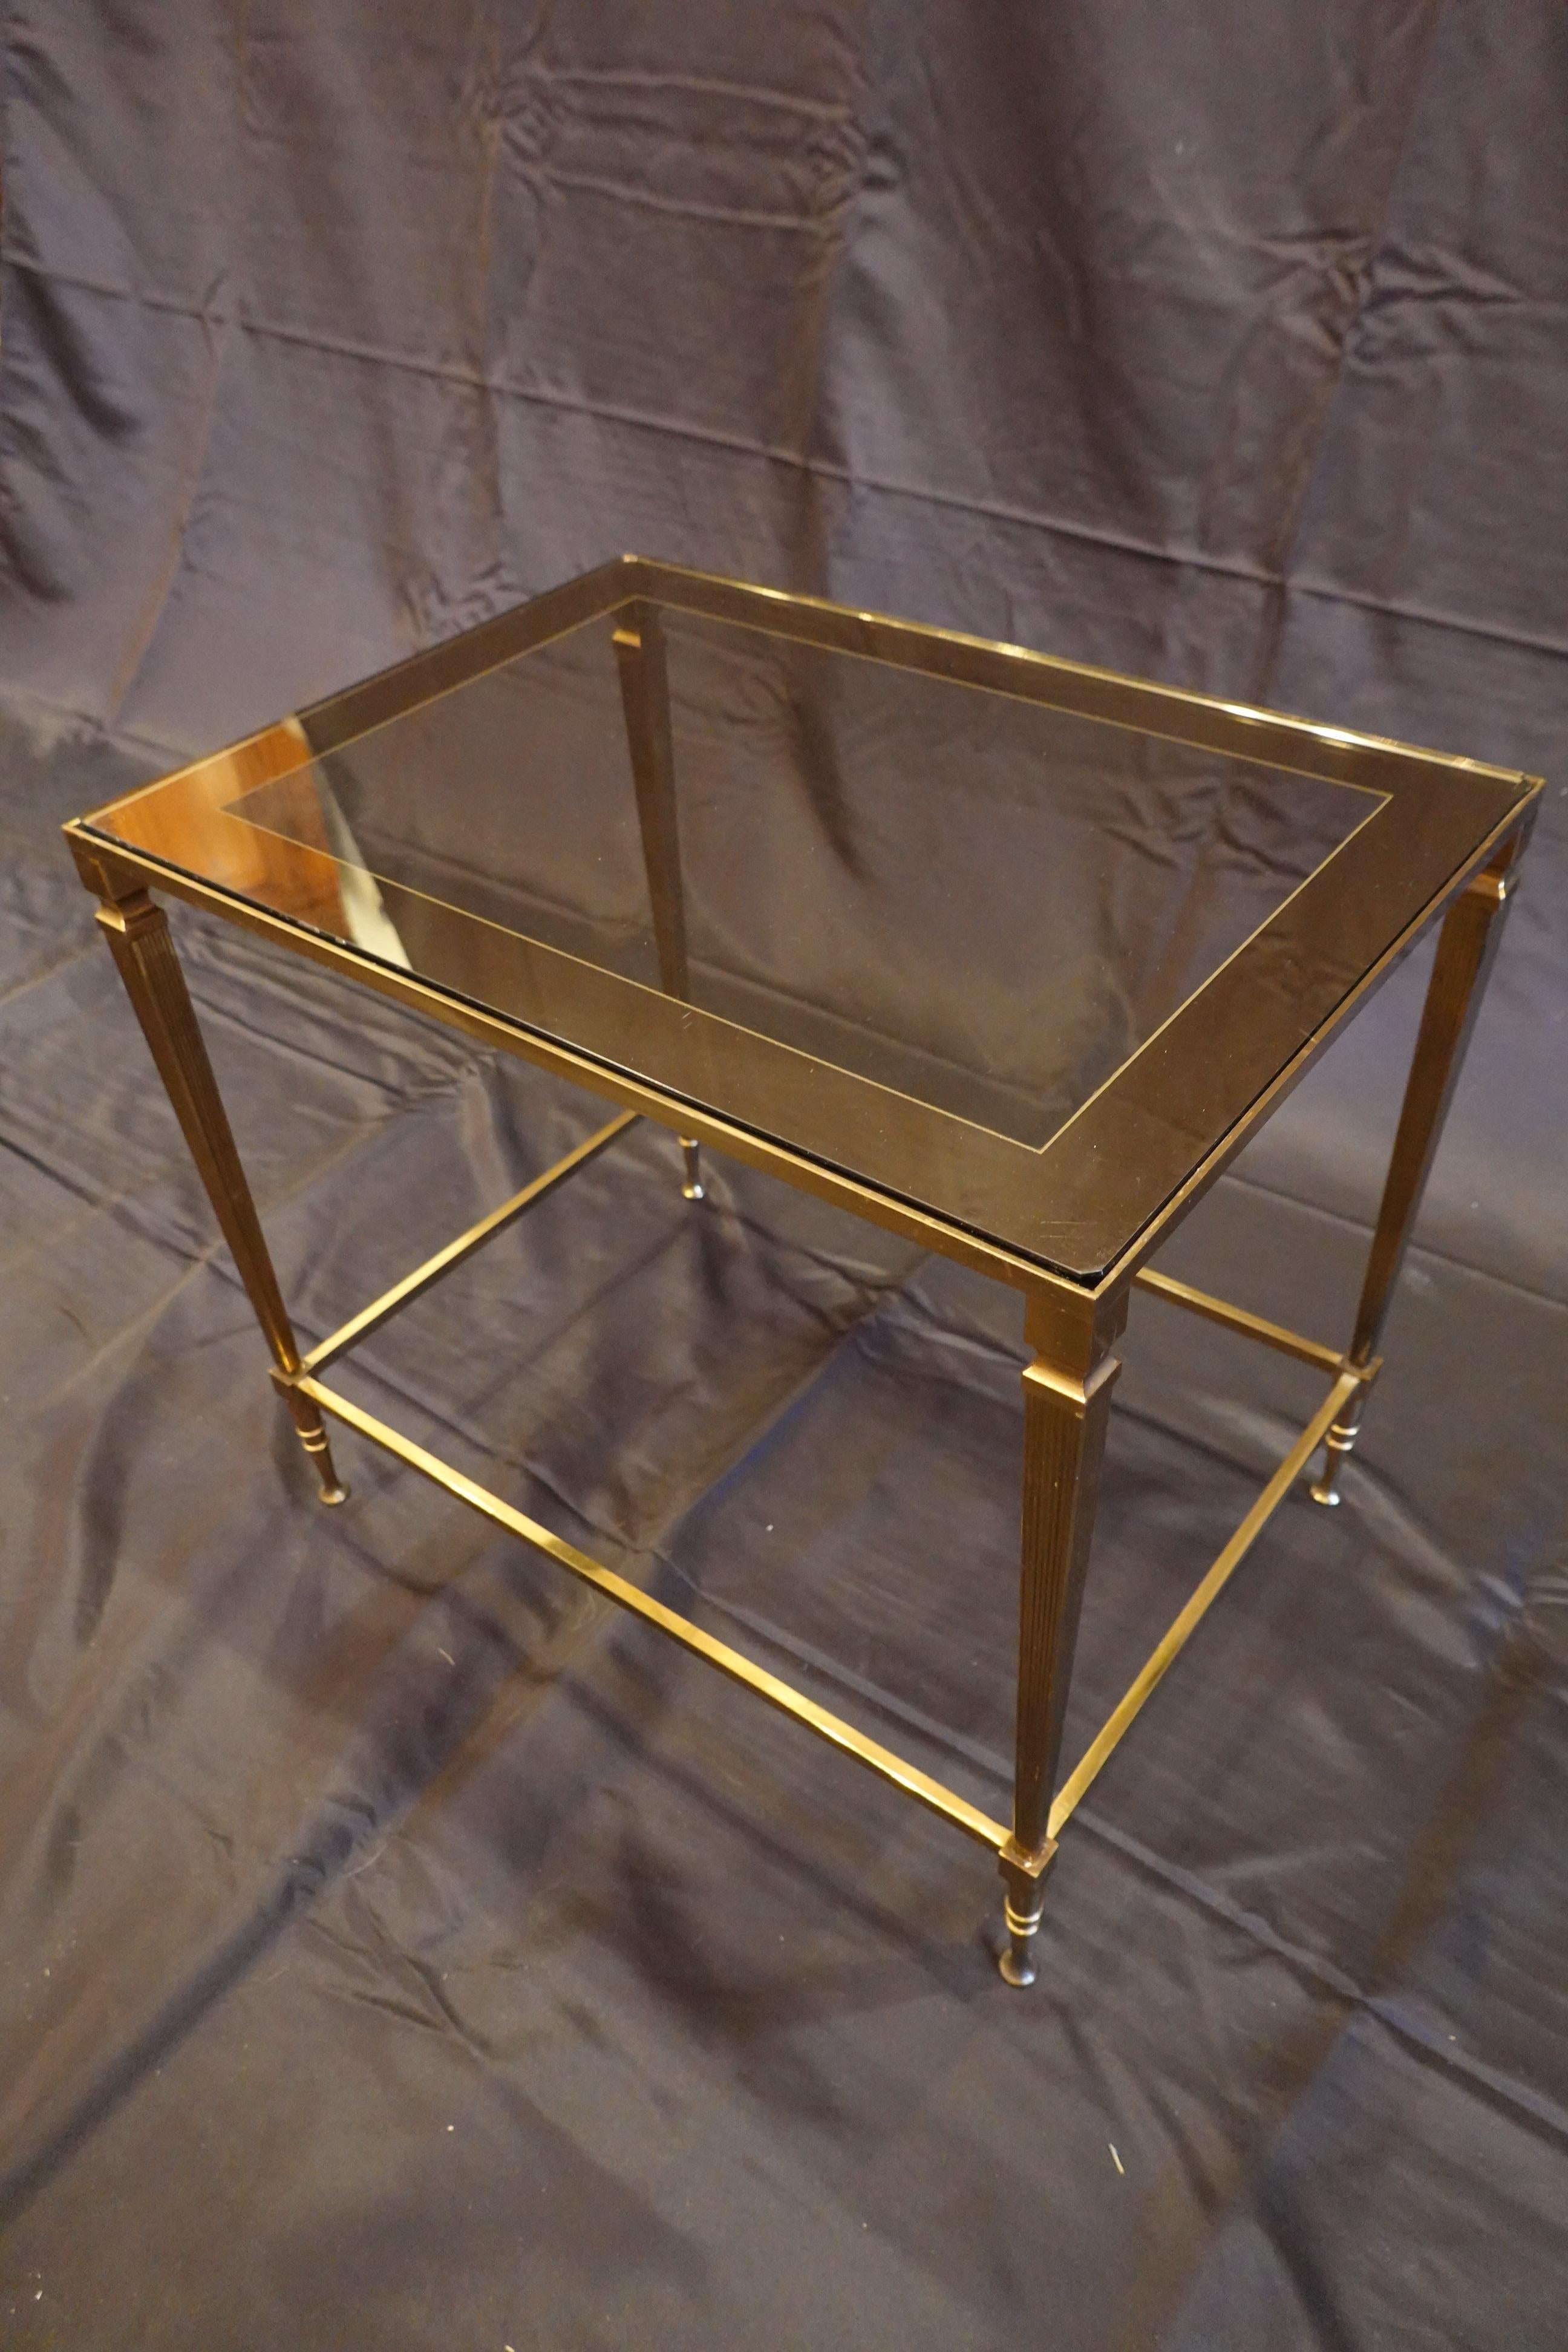 20th Century Pair of Italian Mid-Century Modern Side Tables with Glass and Mirrored Tops For Sale